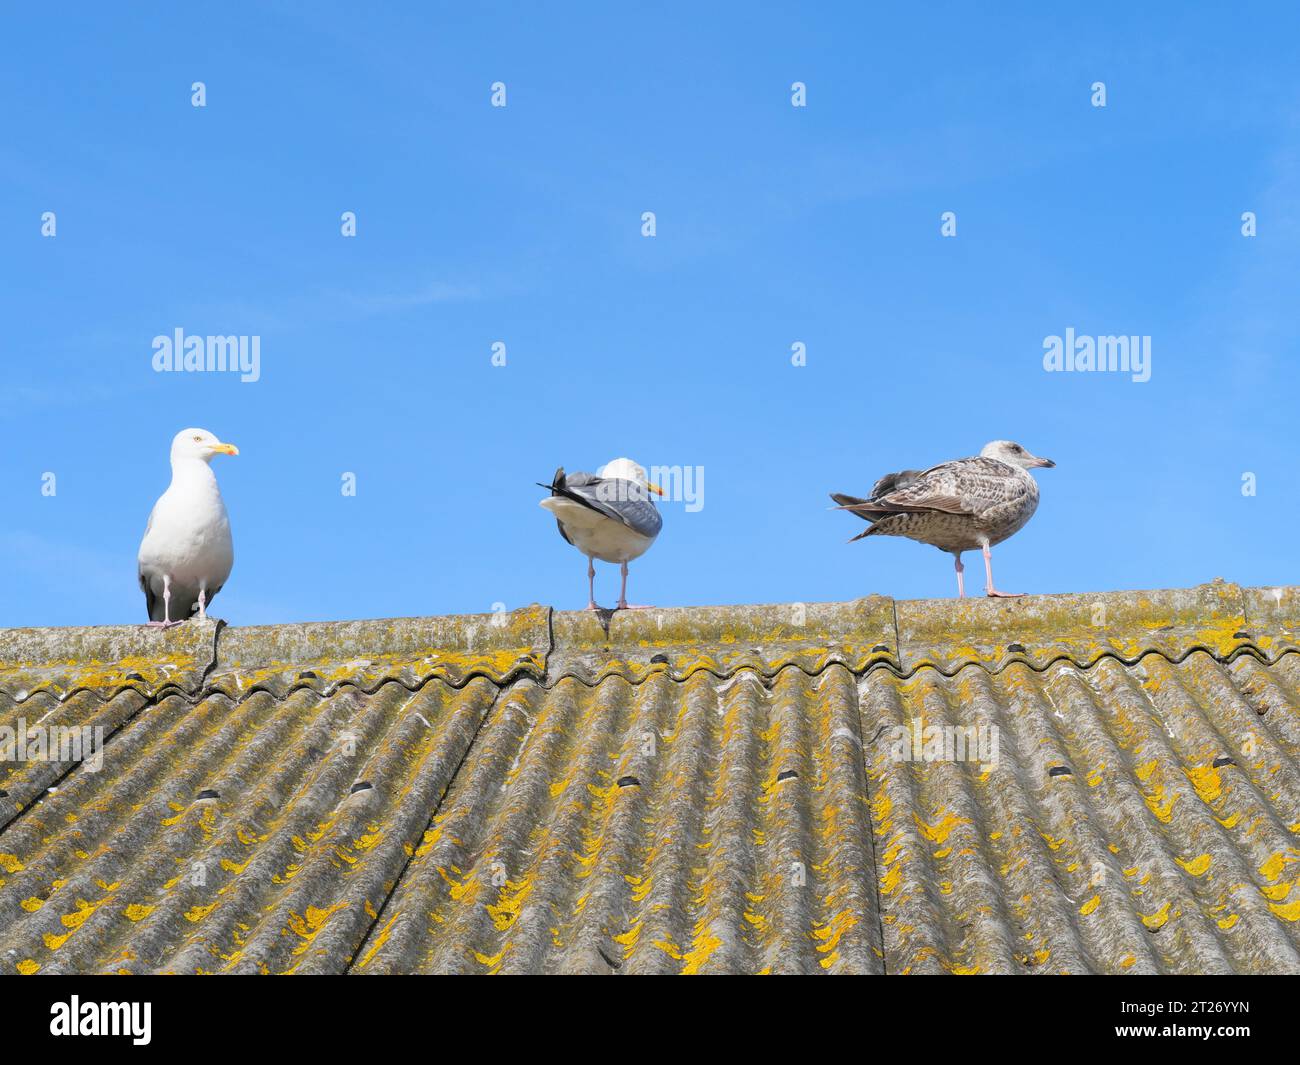 A seagull sitting on a roof made of corrugated asbestos at Lizard Point in Cornwall England Stock Photo